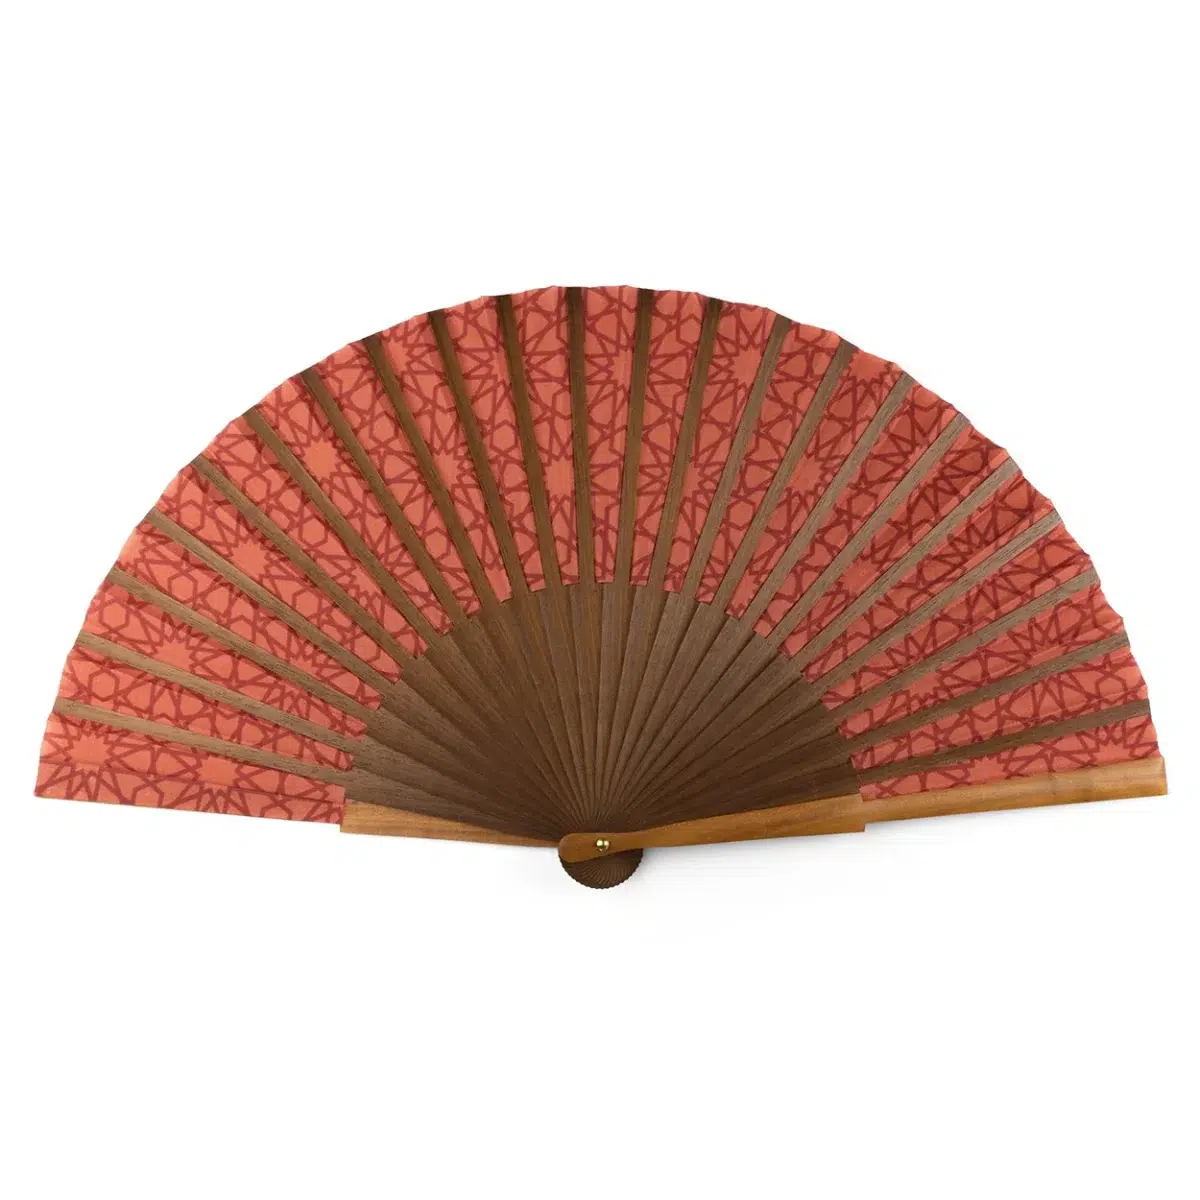 Red silk fan with wood, viewed from the back.